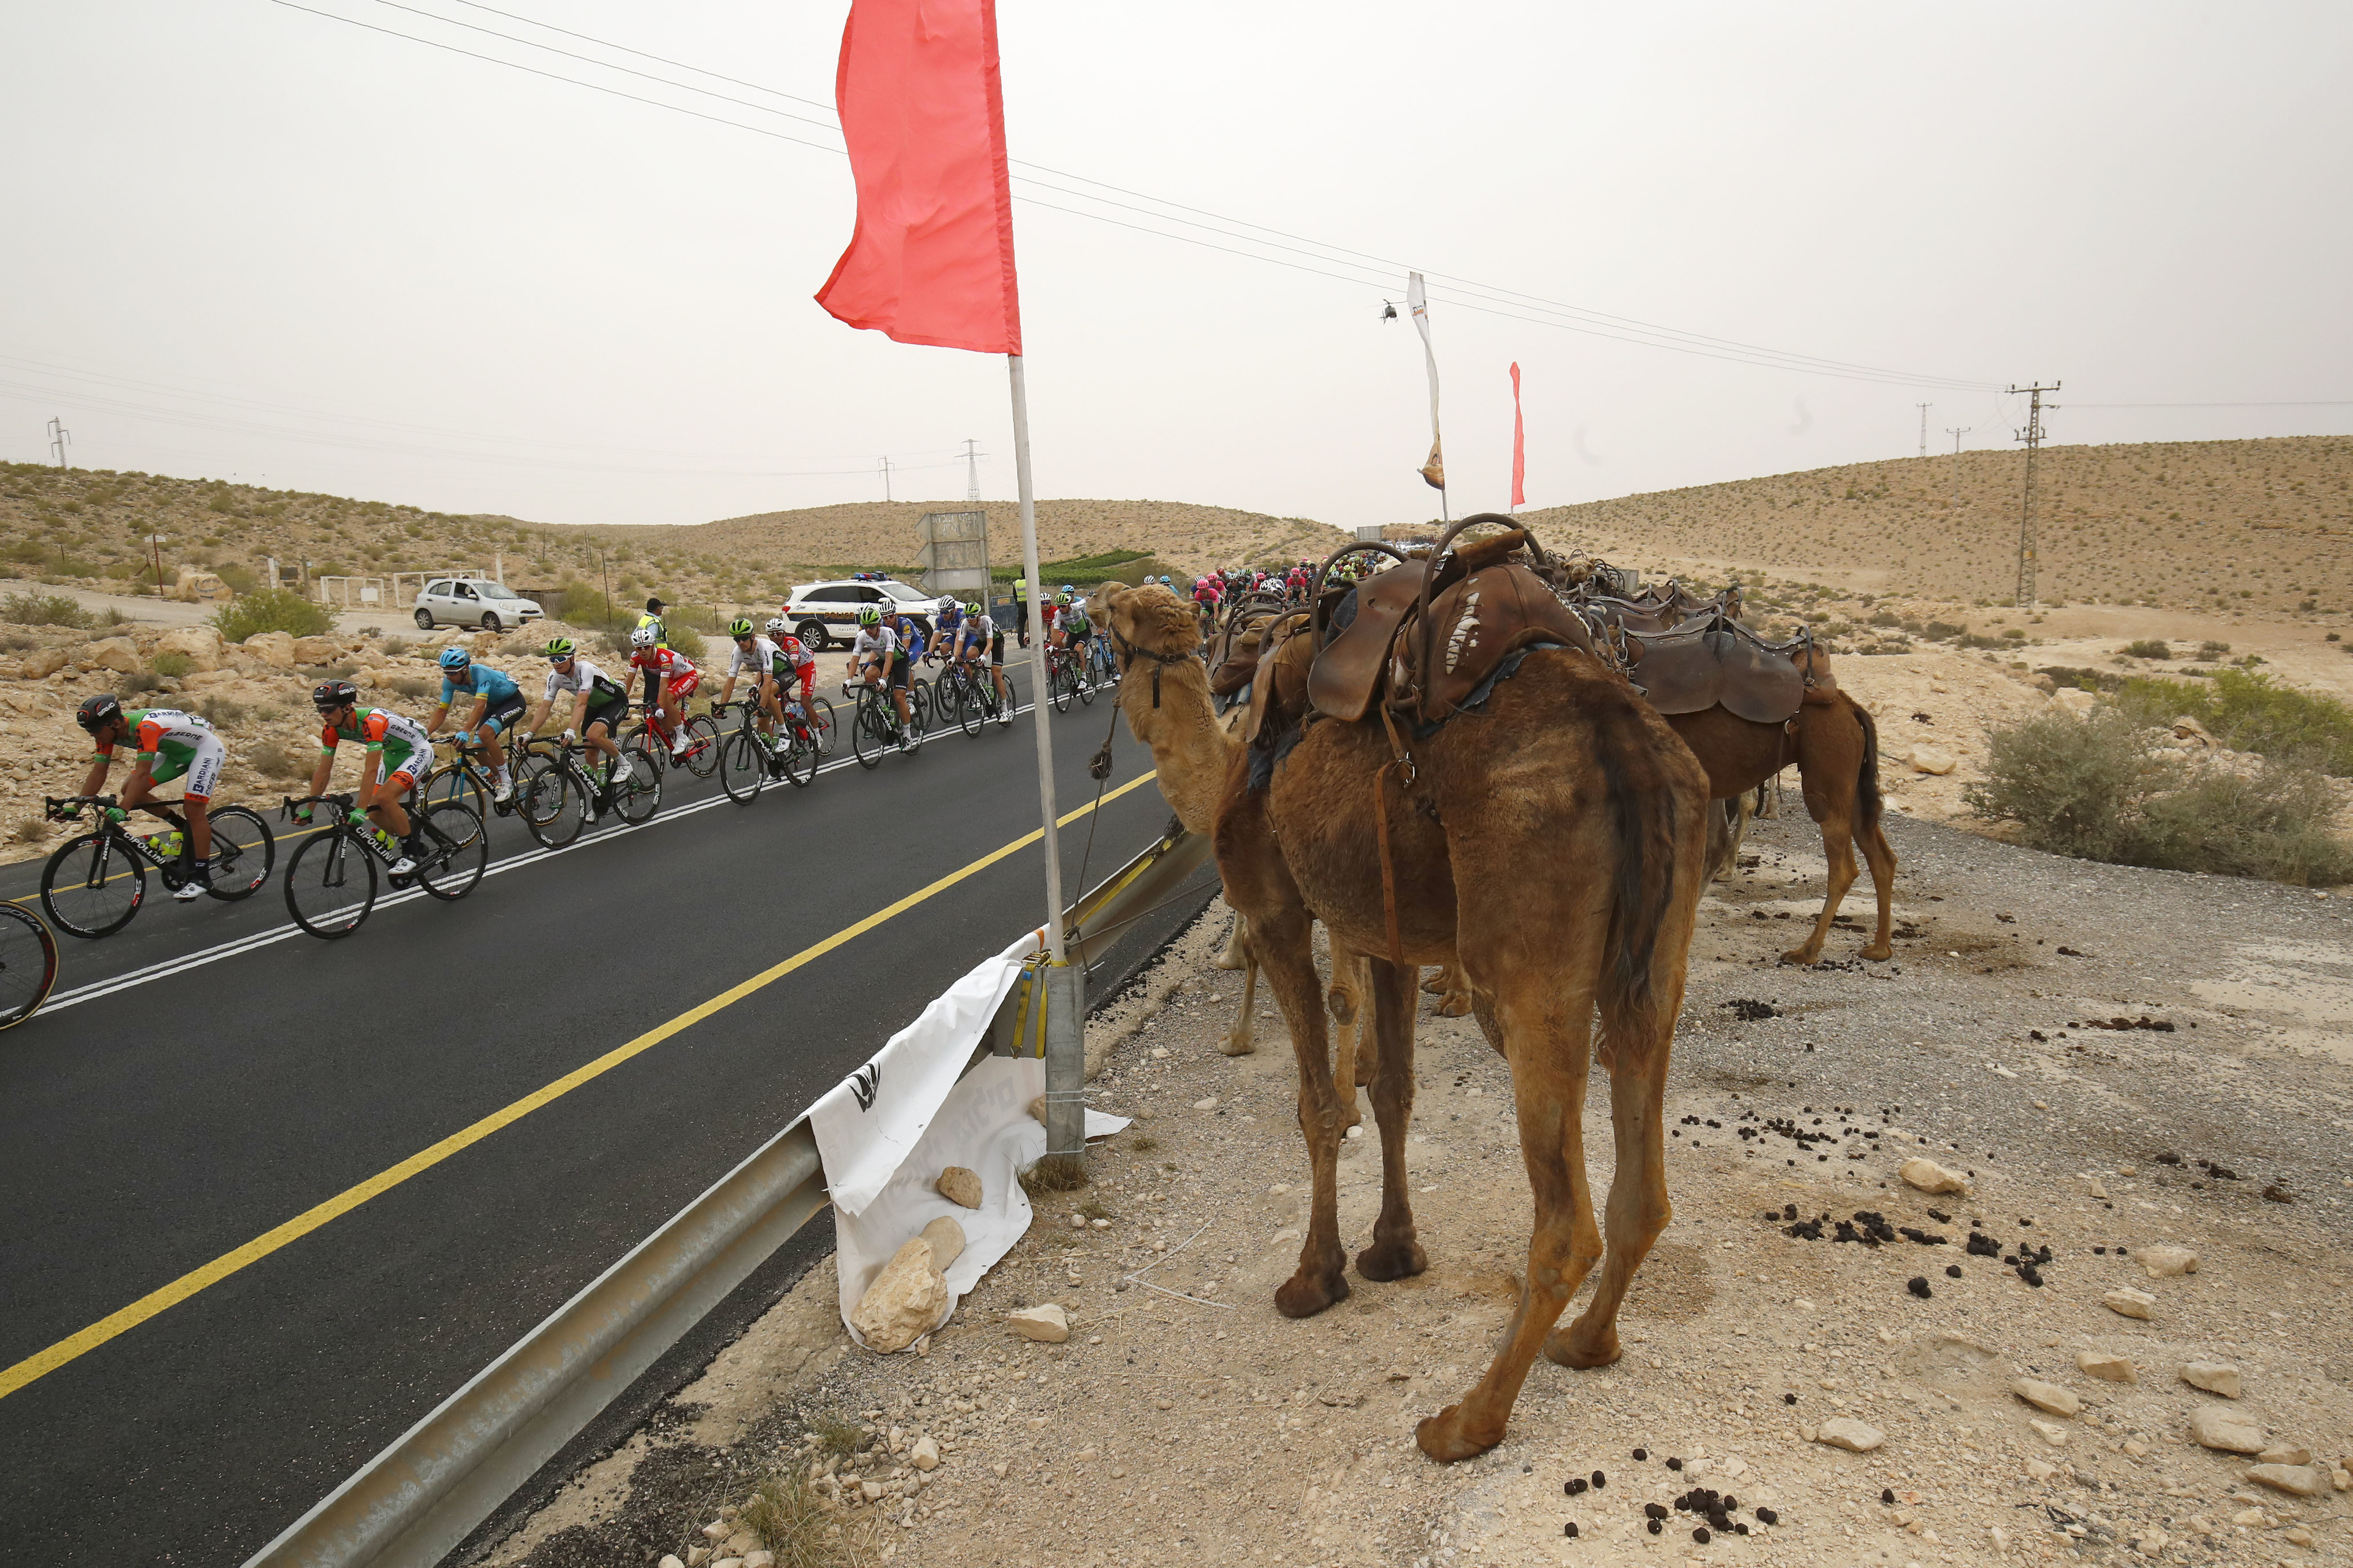 The pack rides past camels during the 3rd stage of the 101st Giro d'Italia, Tour of Italy, on May 6, 2018, 229 kilometers between Beer-Sheva and Eilat. (photo credit: LUK BENIES / AFP)